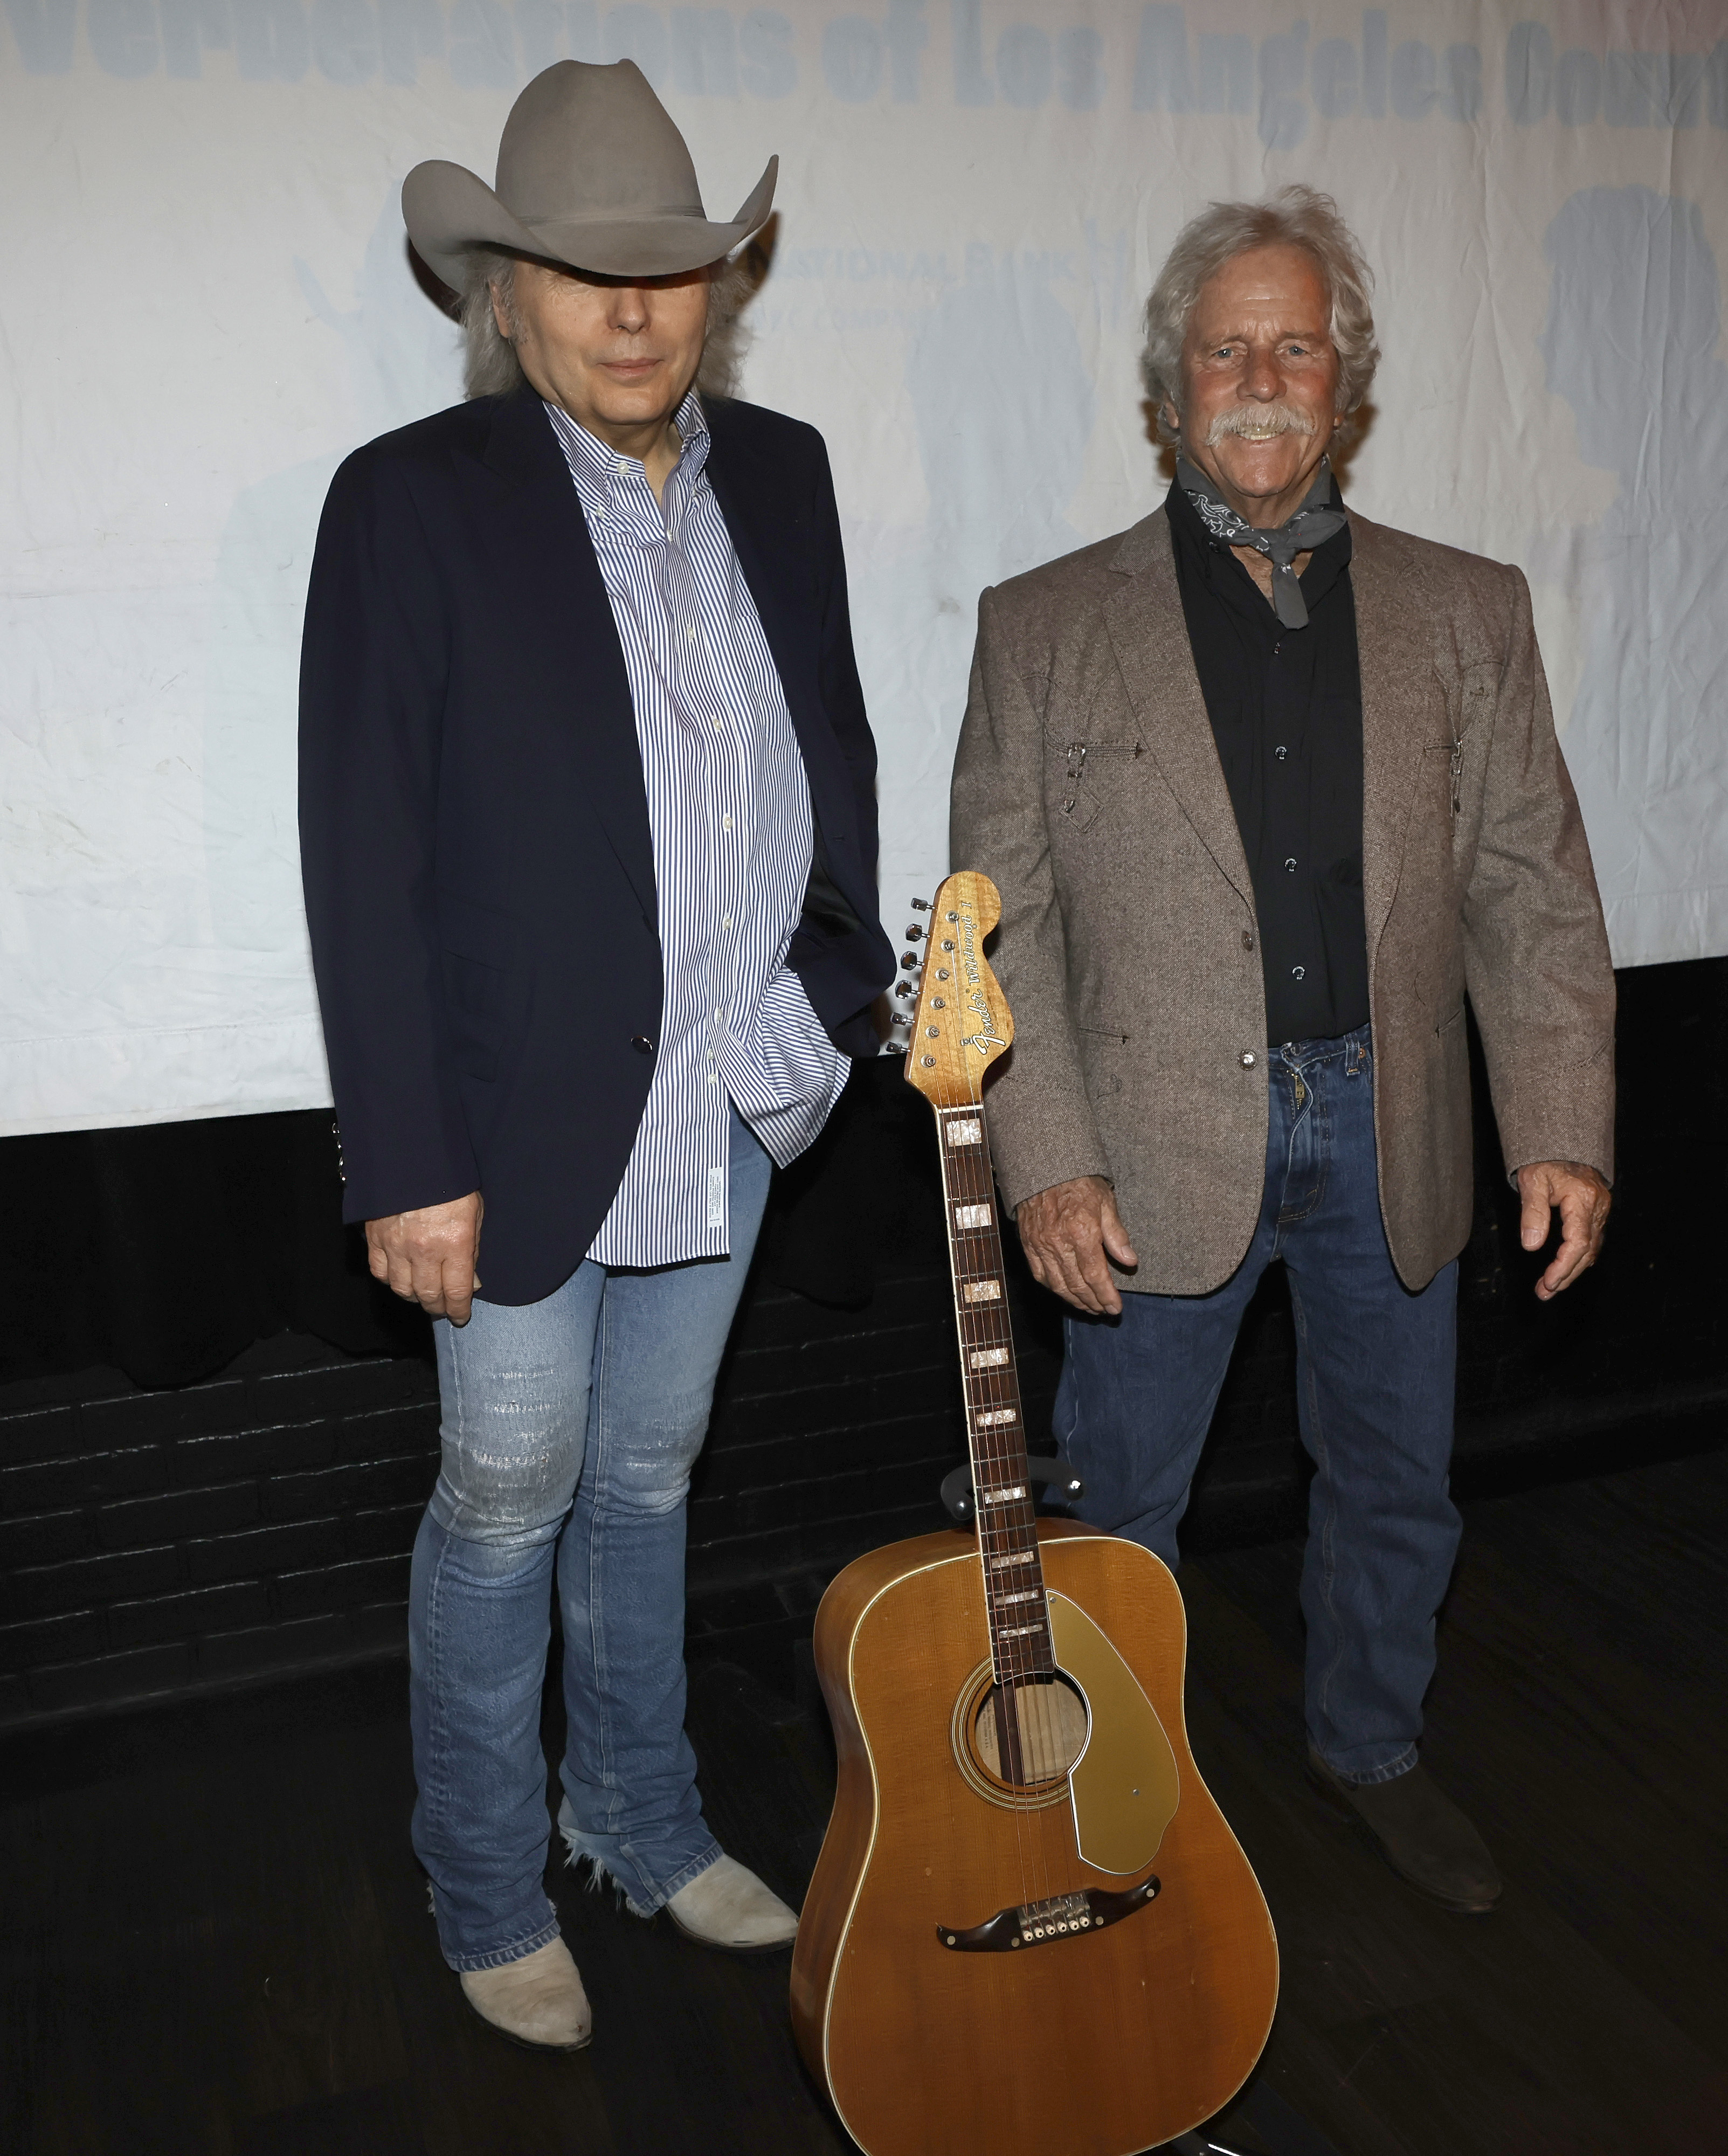 Dwight wearing a Western-style hat and jeans, with a guitar in front of him and Chris